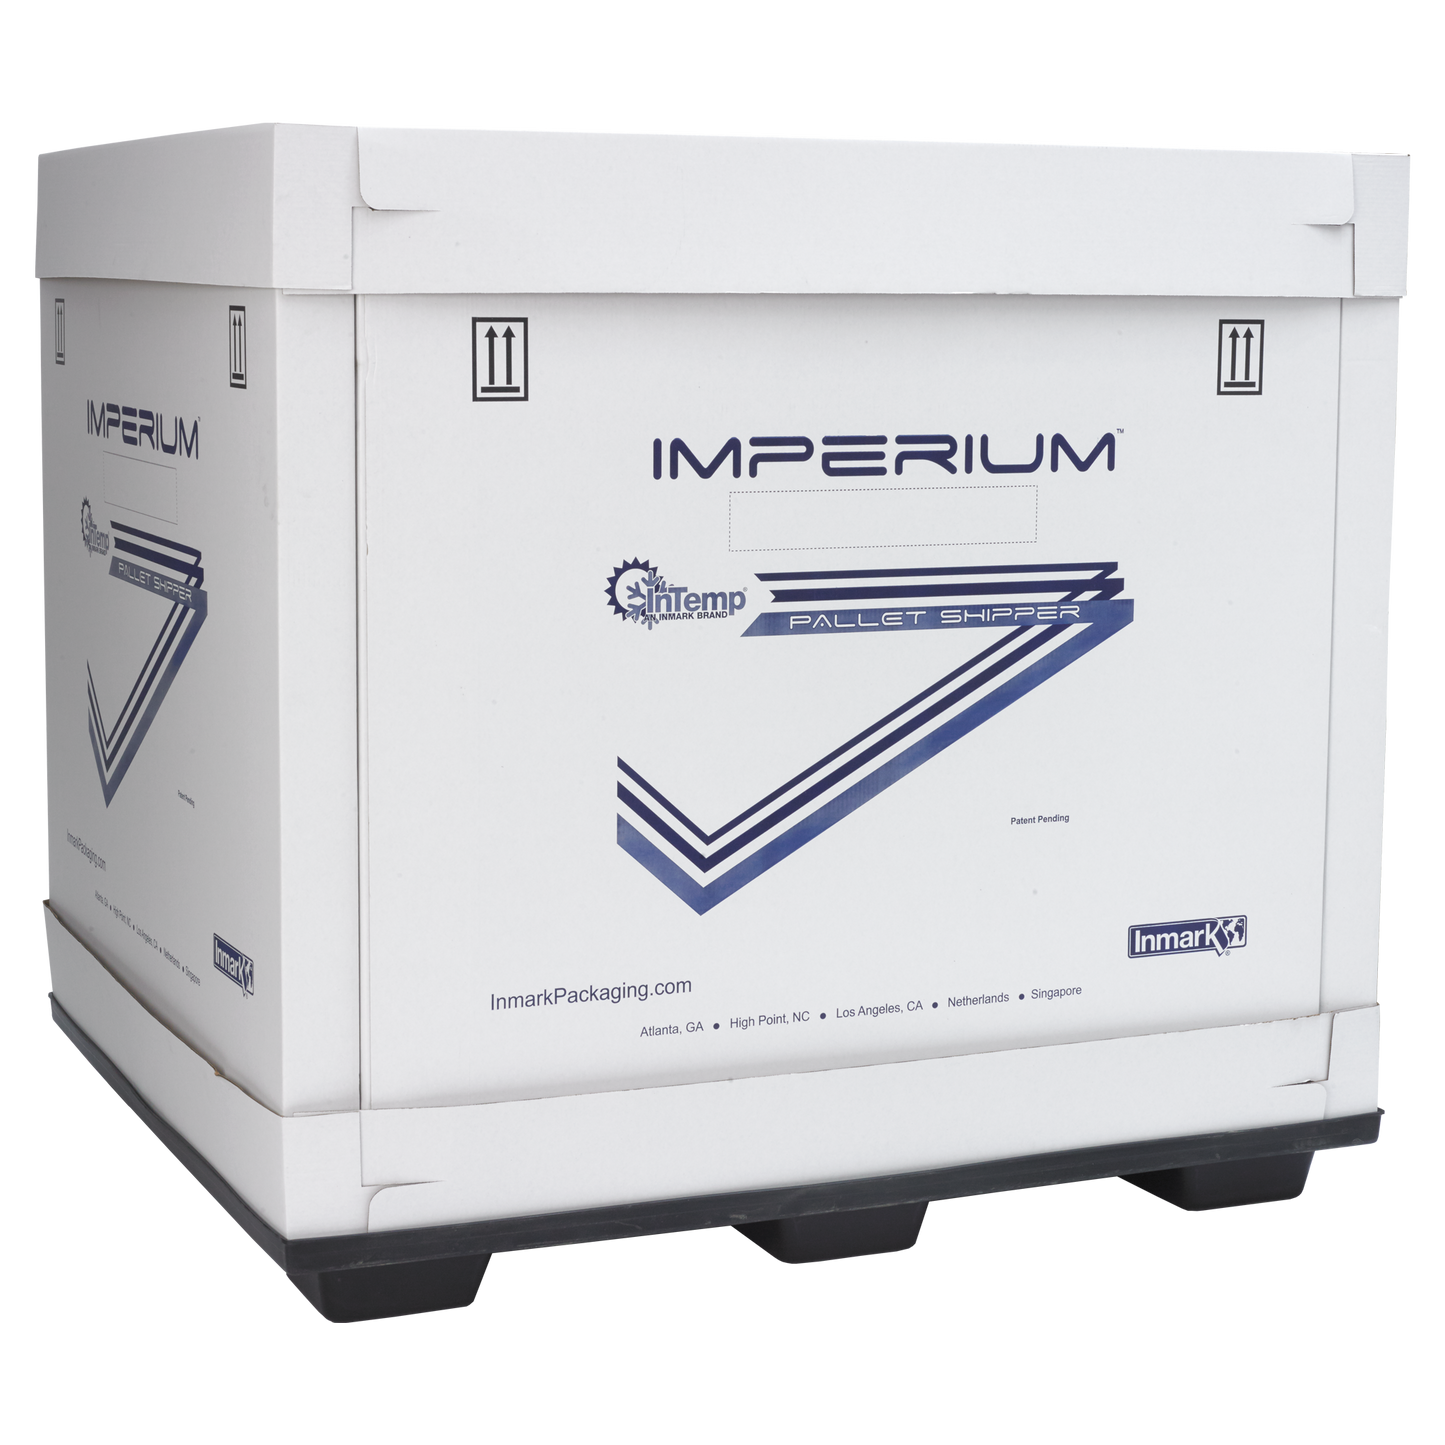 Imperium® (2° - 8°C) / (2° - 25°C) / (15° - 25°C) XL Pallet Insulated Shipping System